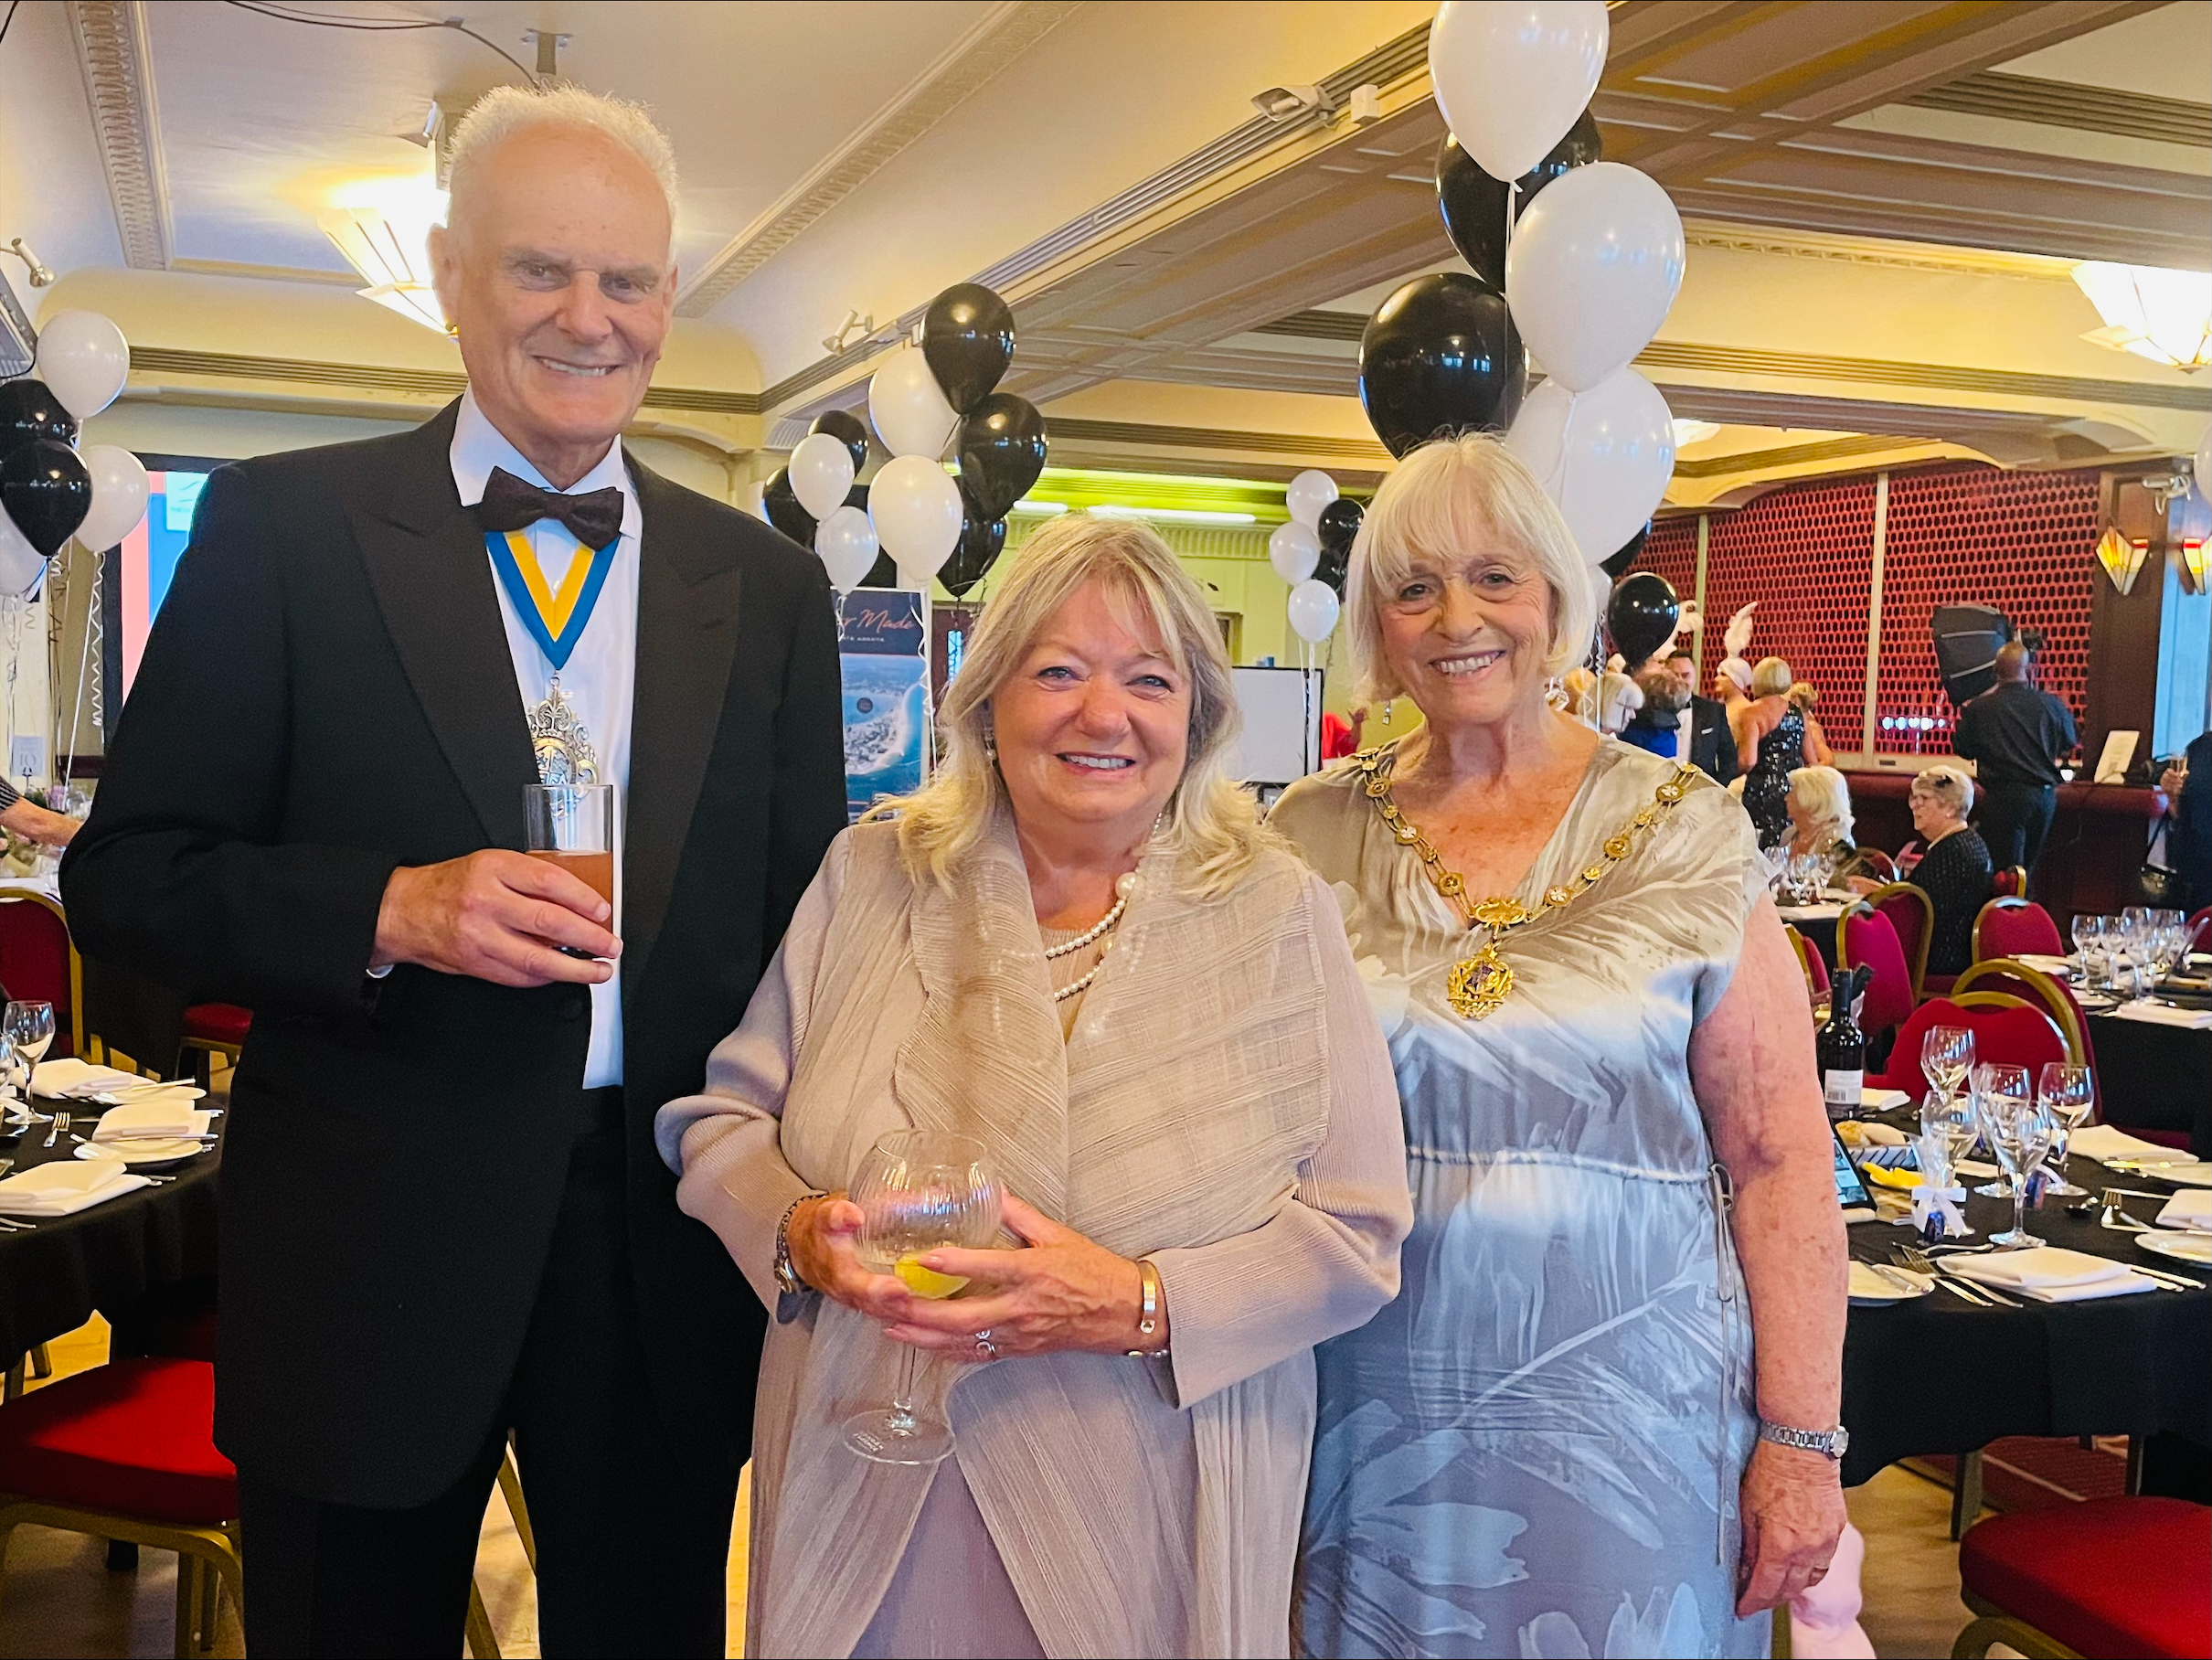 DCCF trustee, Di Bird (centre) at the charity's Black Tie Dinner 2022.